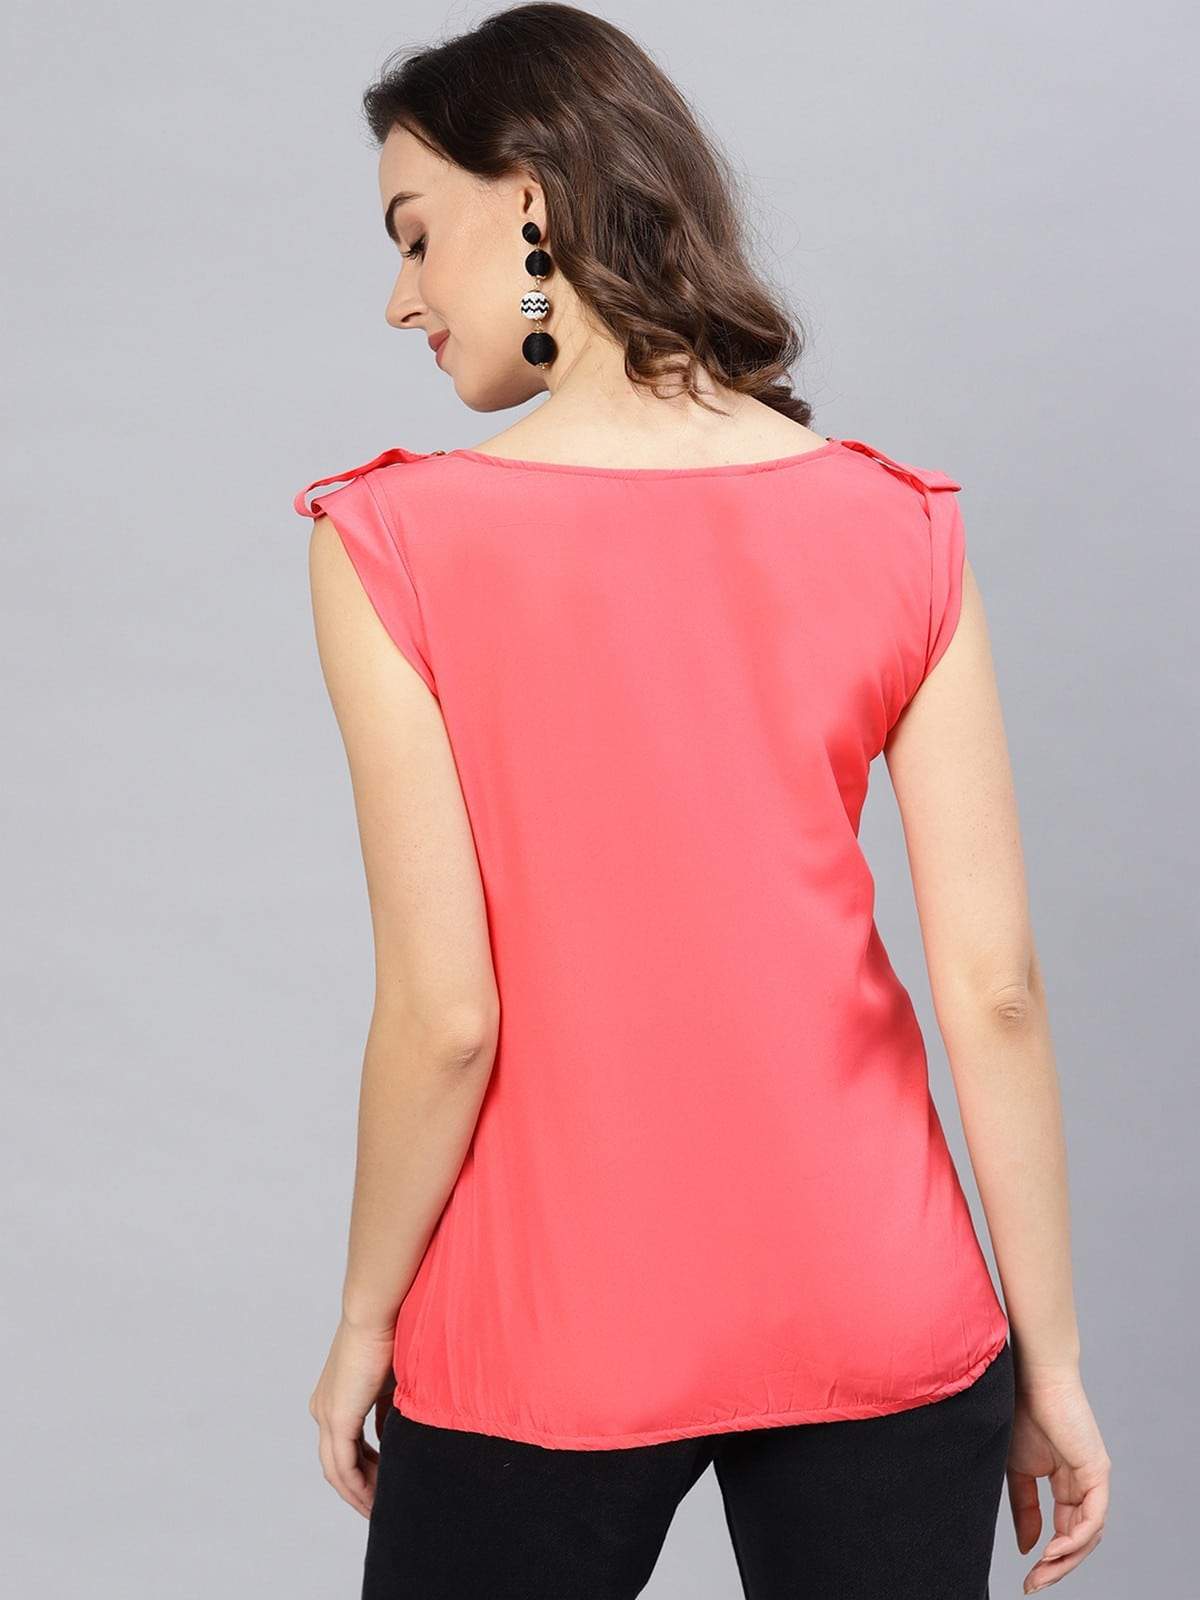 Women's Coral Top With Fake Shoulder-Tab - Pannkh